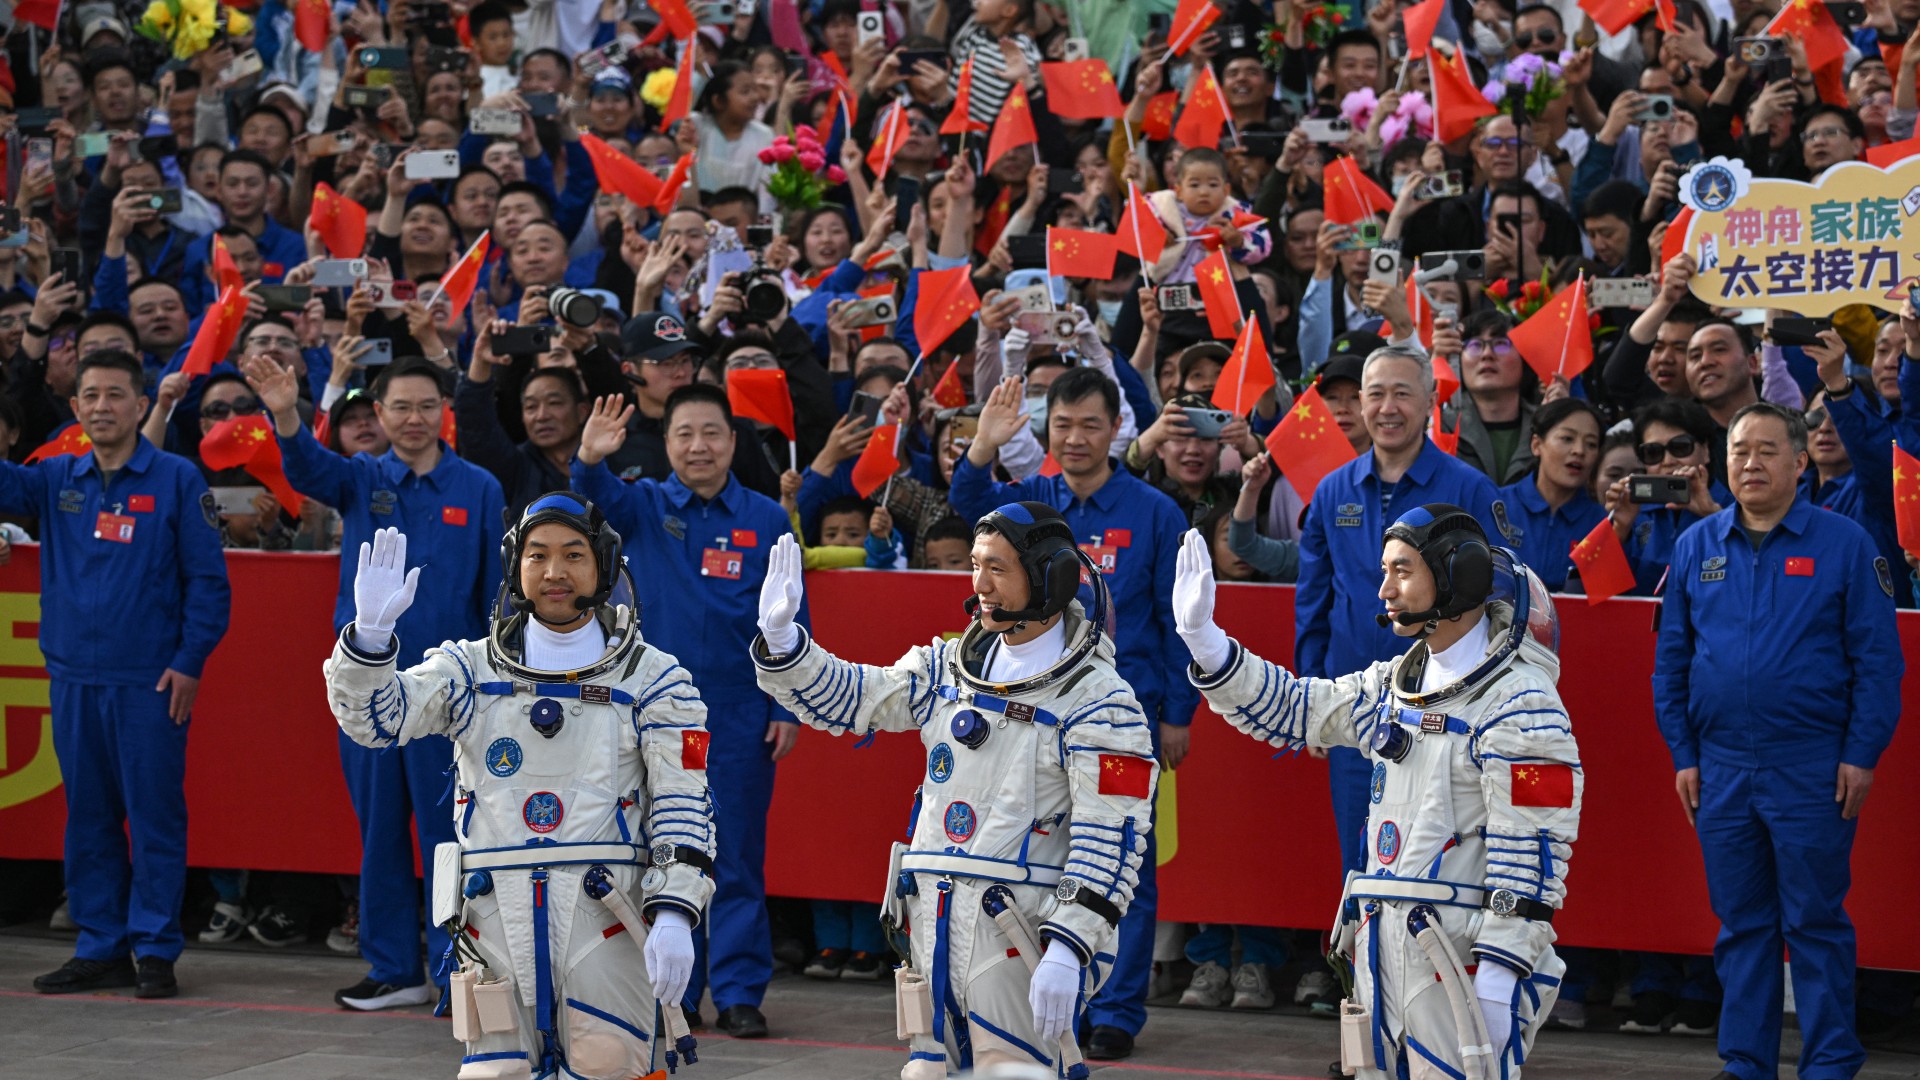 three astronauts in white spacesuits wave to a smiling crowd holding red flags